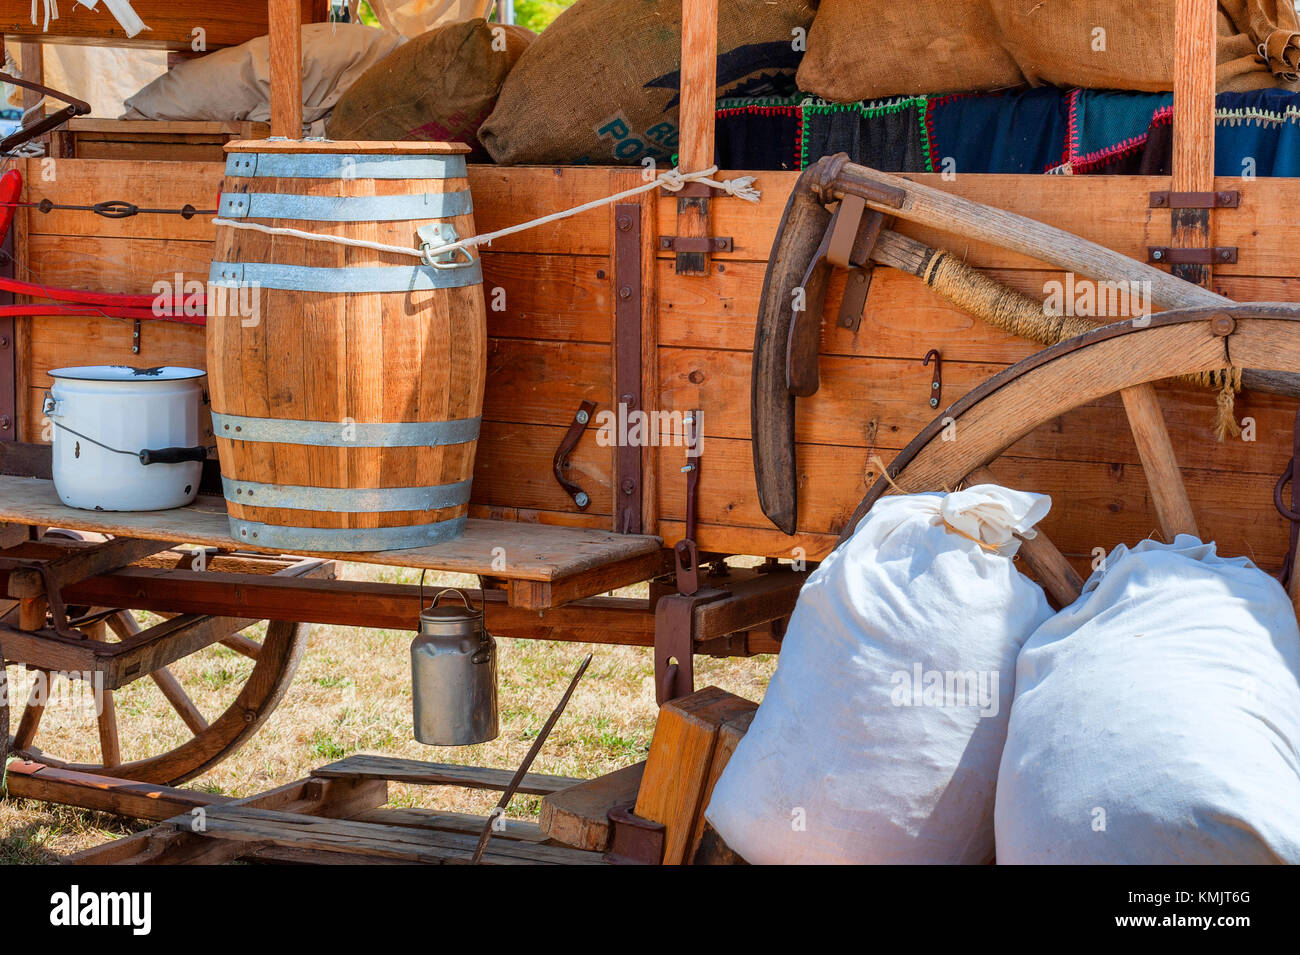 McMinnville, Oregon, USA - August 13, 2016:  Close up of items along the side of a wooden wagon on display at Yamhill County Harvest Festival. Stock Photo